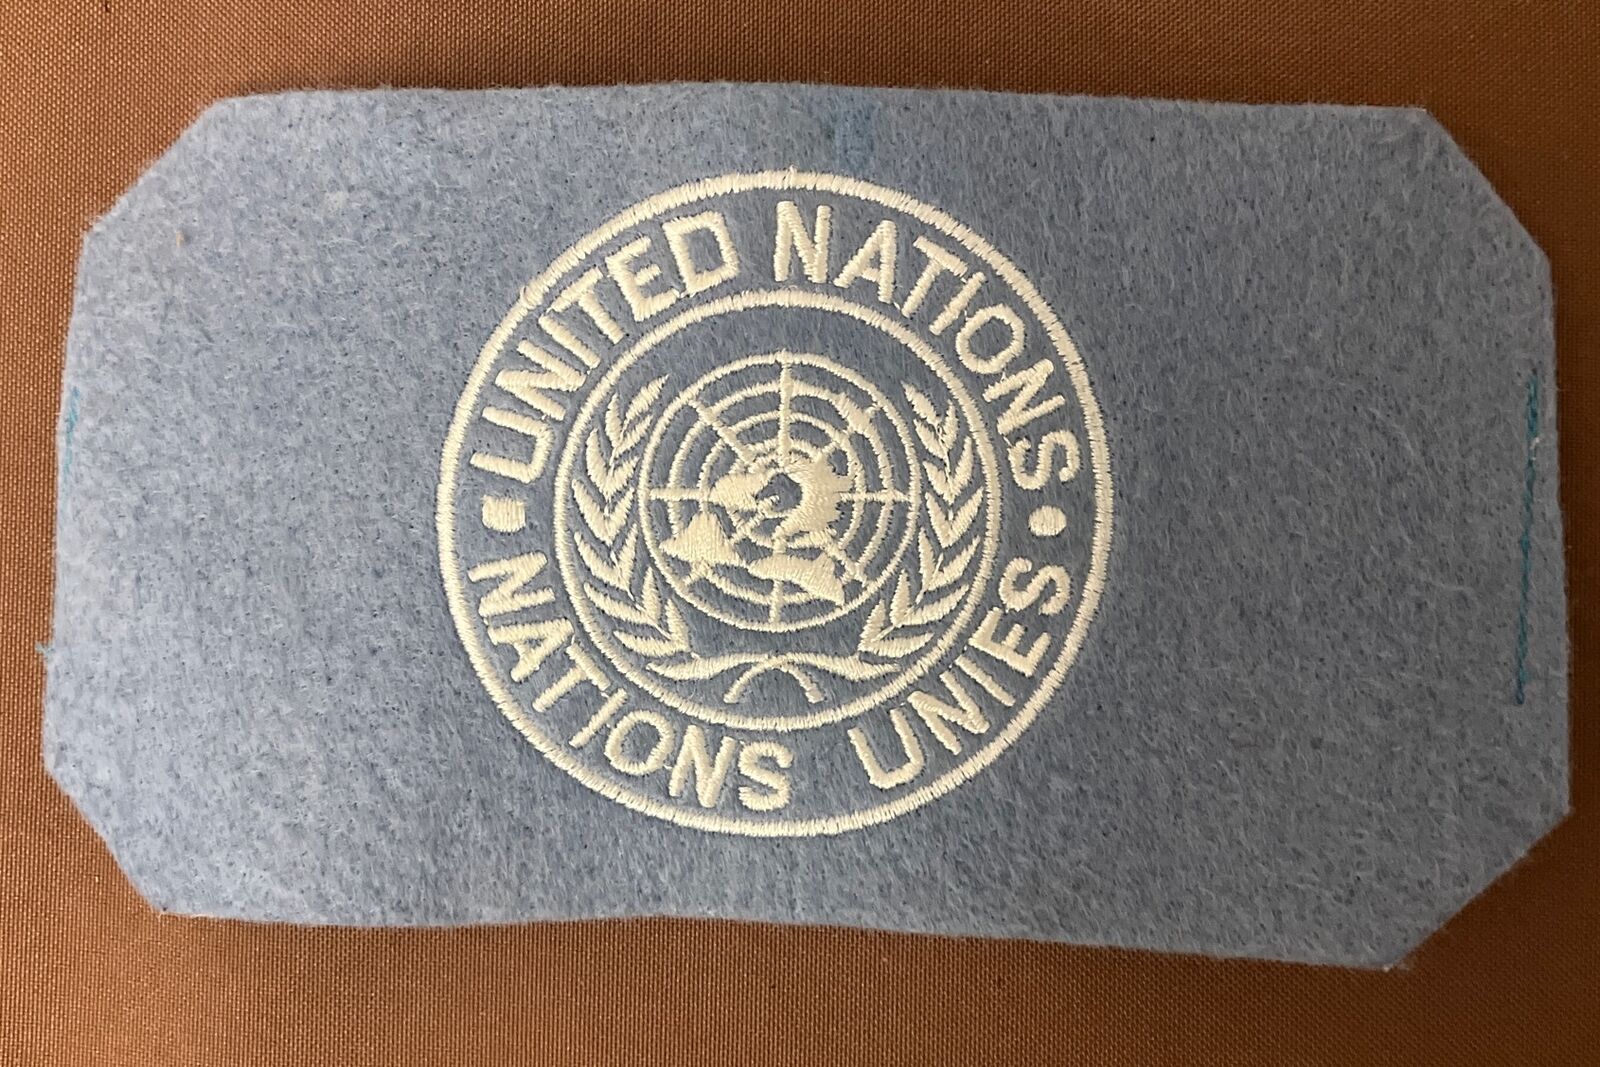 New UN United Nations Brassard/armband as used by advisers/observers